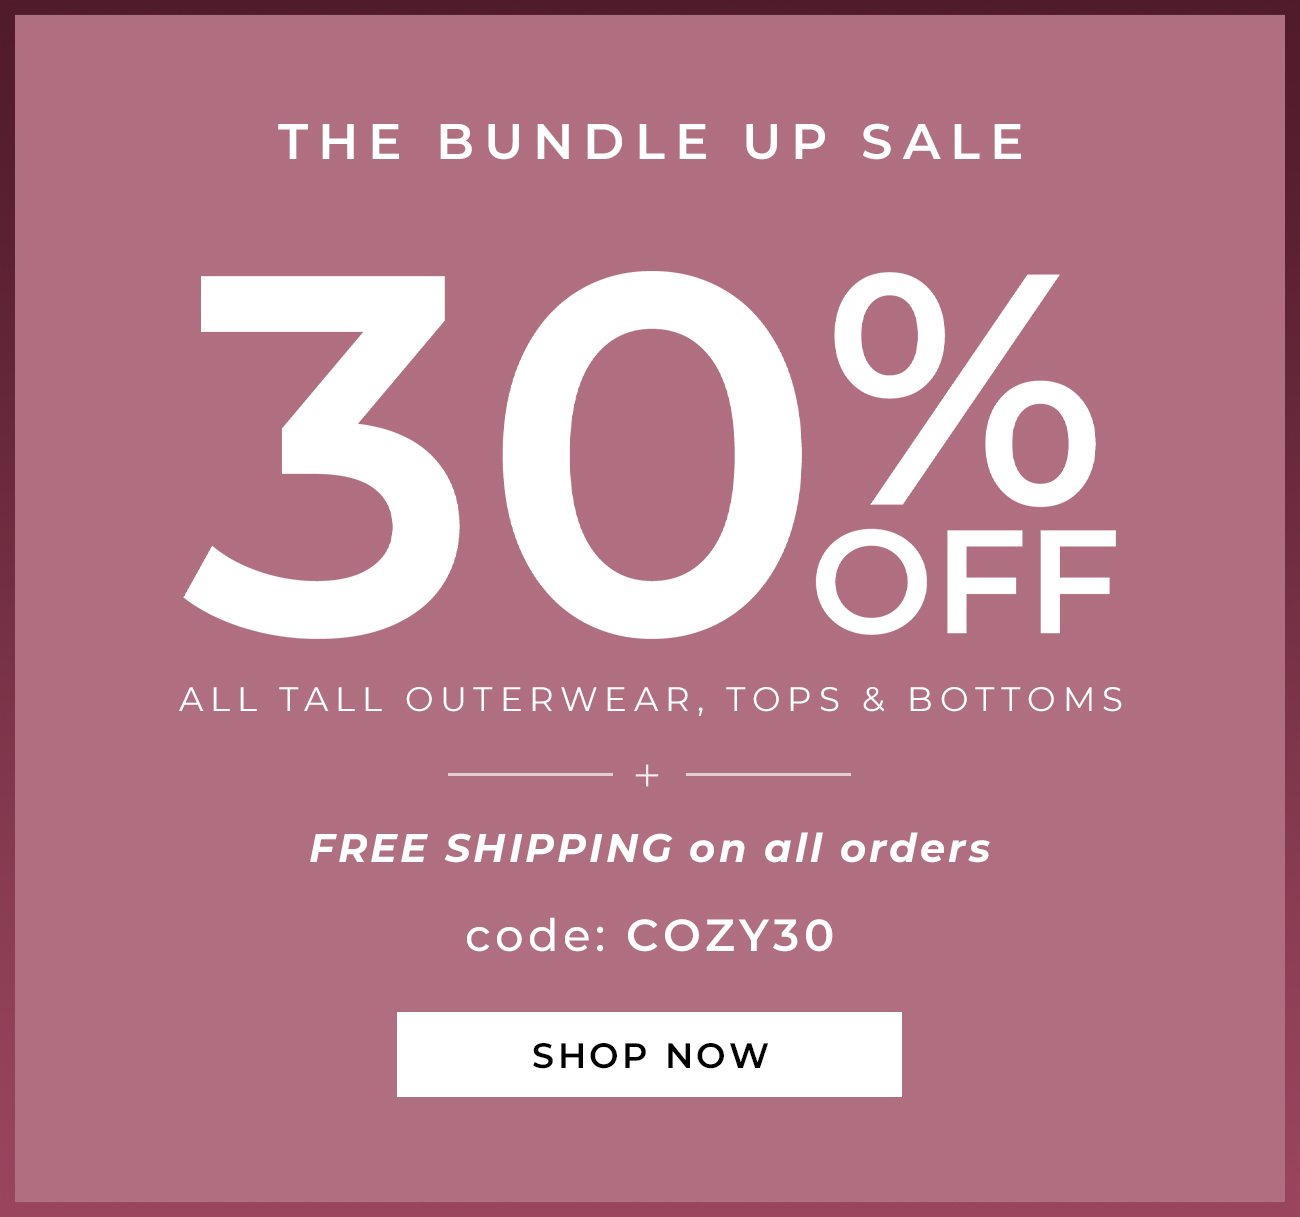 THE BUNDLE UP SALE - 30% Off All Tall Outerwear, Tops & Bottoms + Free Shipping On All Orders CODE: COZY30 